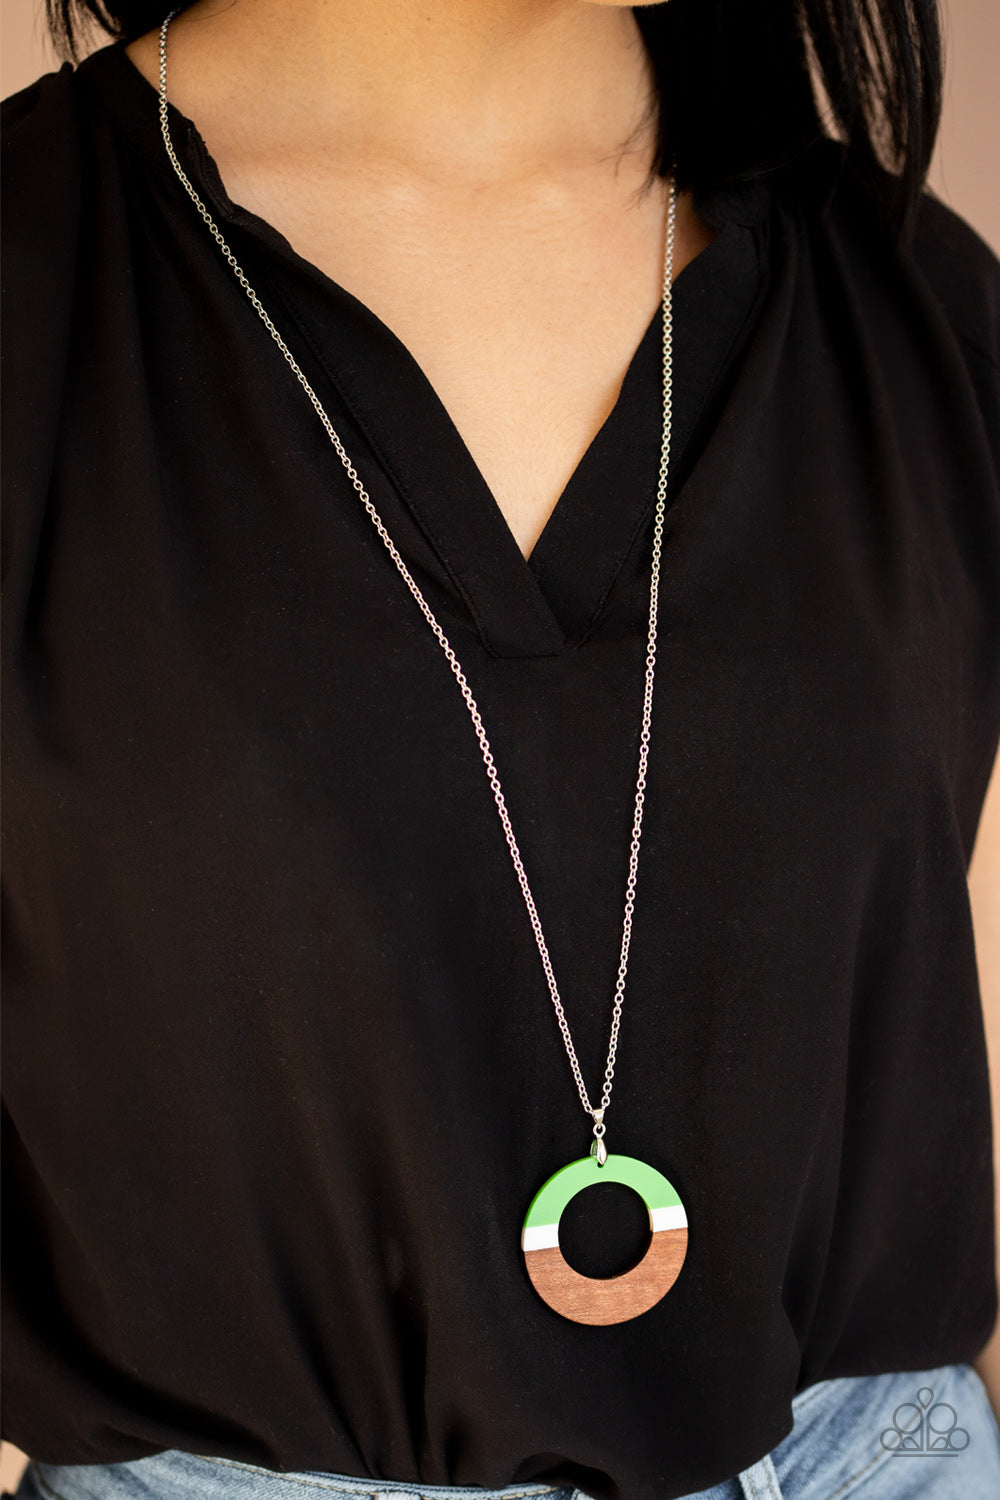 Paparazzi Jewelry & Accessories - Sail Into The Sunset - Green Necklace. Bling By Titia Boutique